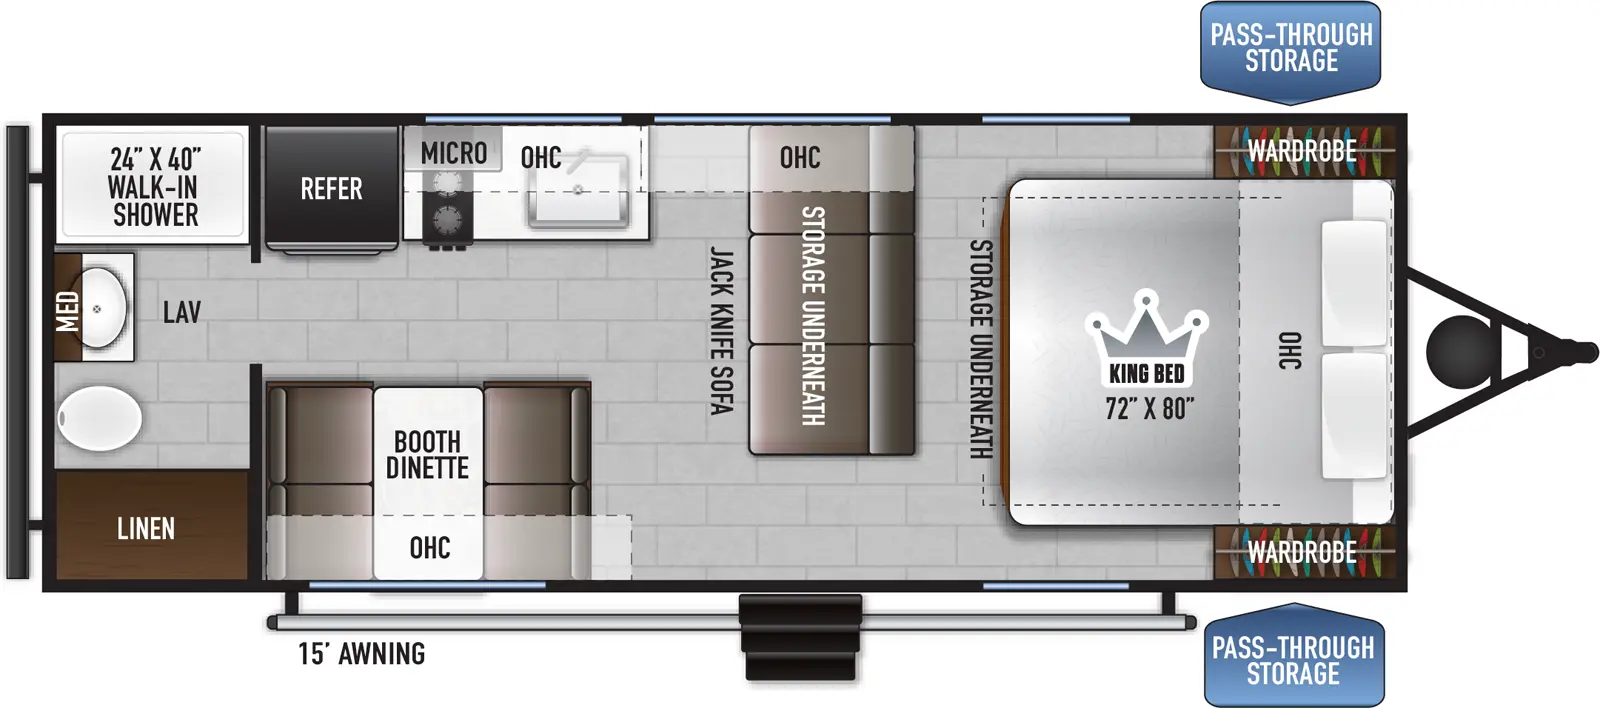 The 220RBLE has zero slideouts and one entry. Exterior features a 15 foot awning, and front pass-thru storage. Interior layout front to back: foot-facing king bed with storage underneath, overhead cabinet and wardrobes on each side; jackknife sofa with storage underneath along inner wall; off-door side overhead cabinet, kitchen counter with sink, cooktop, overhead cabinet, microwave, and refrigerator; door side entry, booth dinette and overhead cabinet; rear full bathroom with walk-in shower, medicine cabinet, and linen closet.